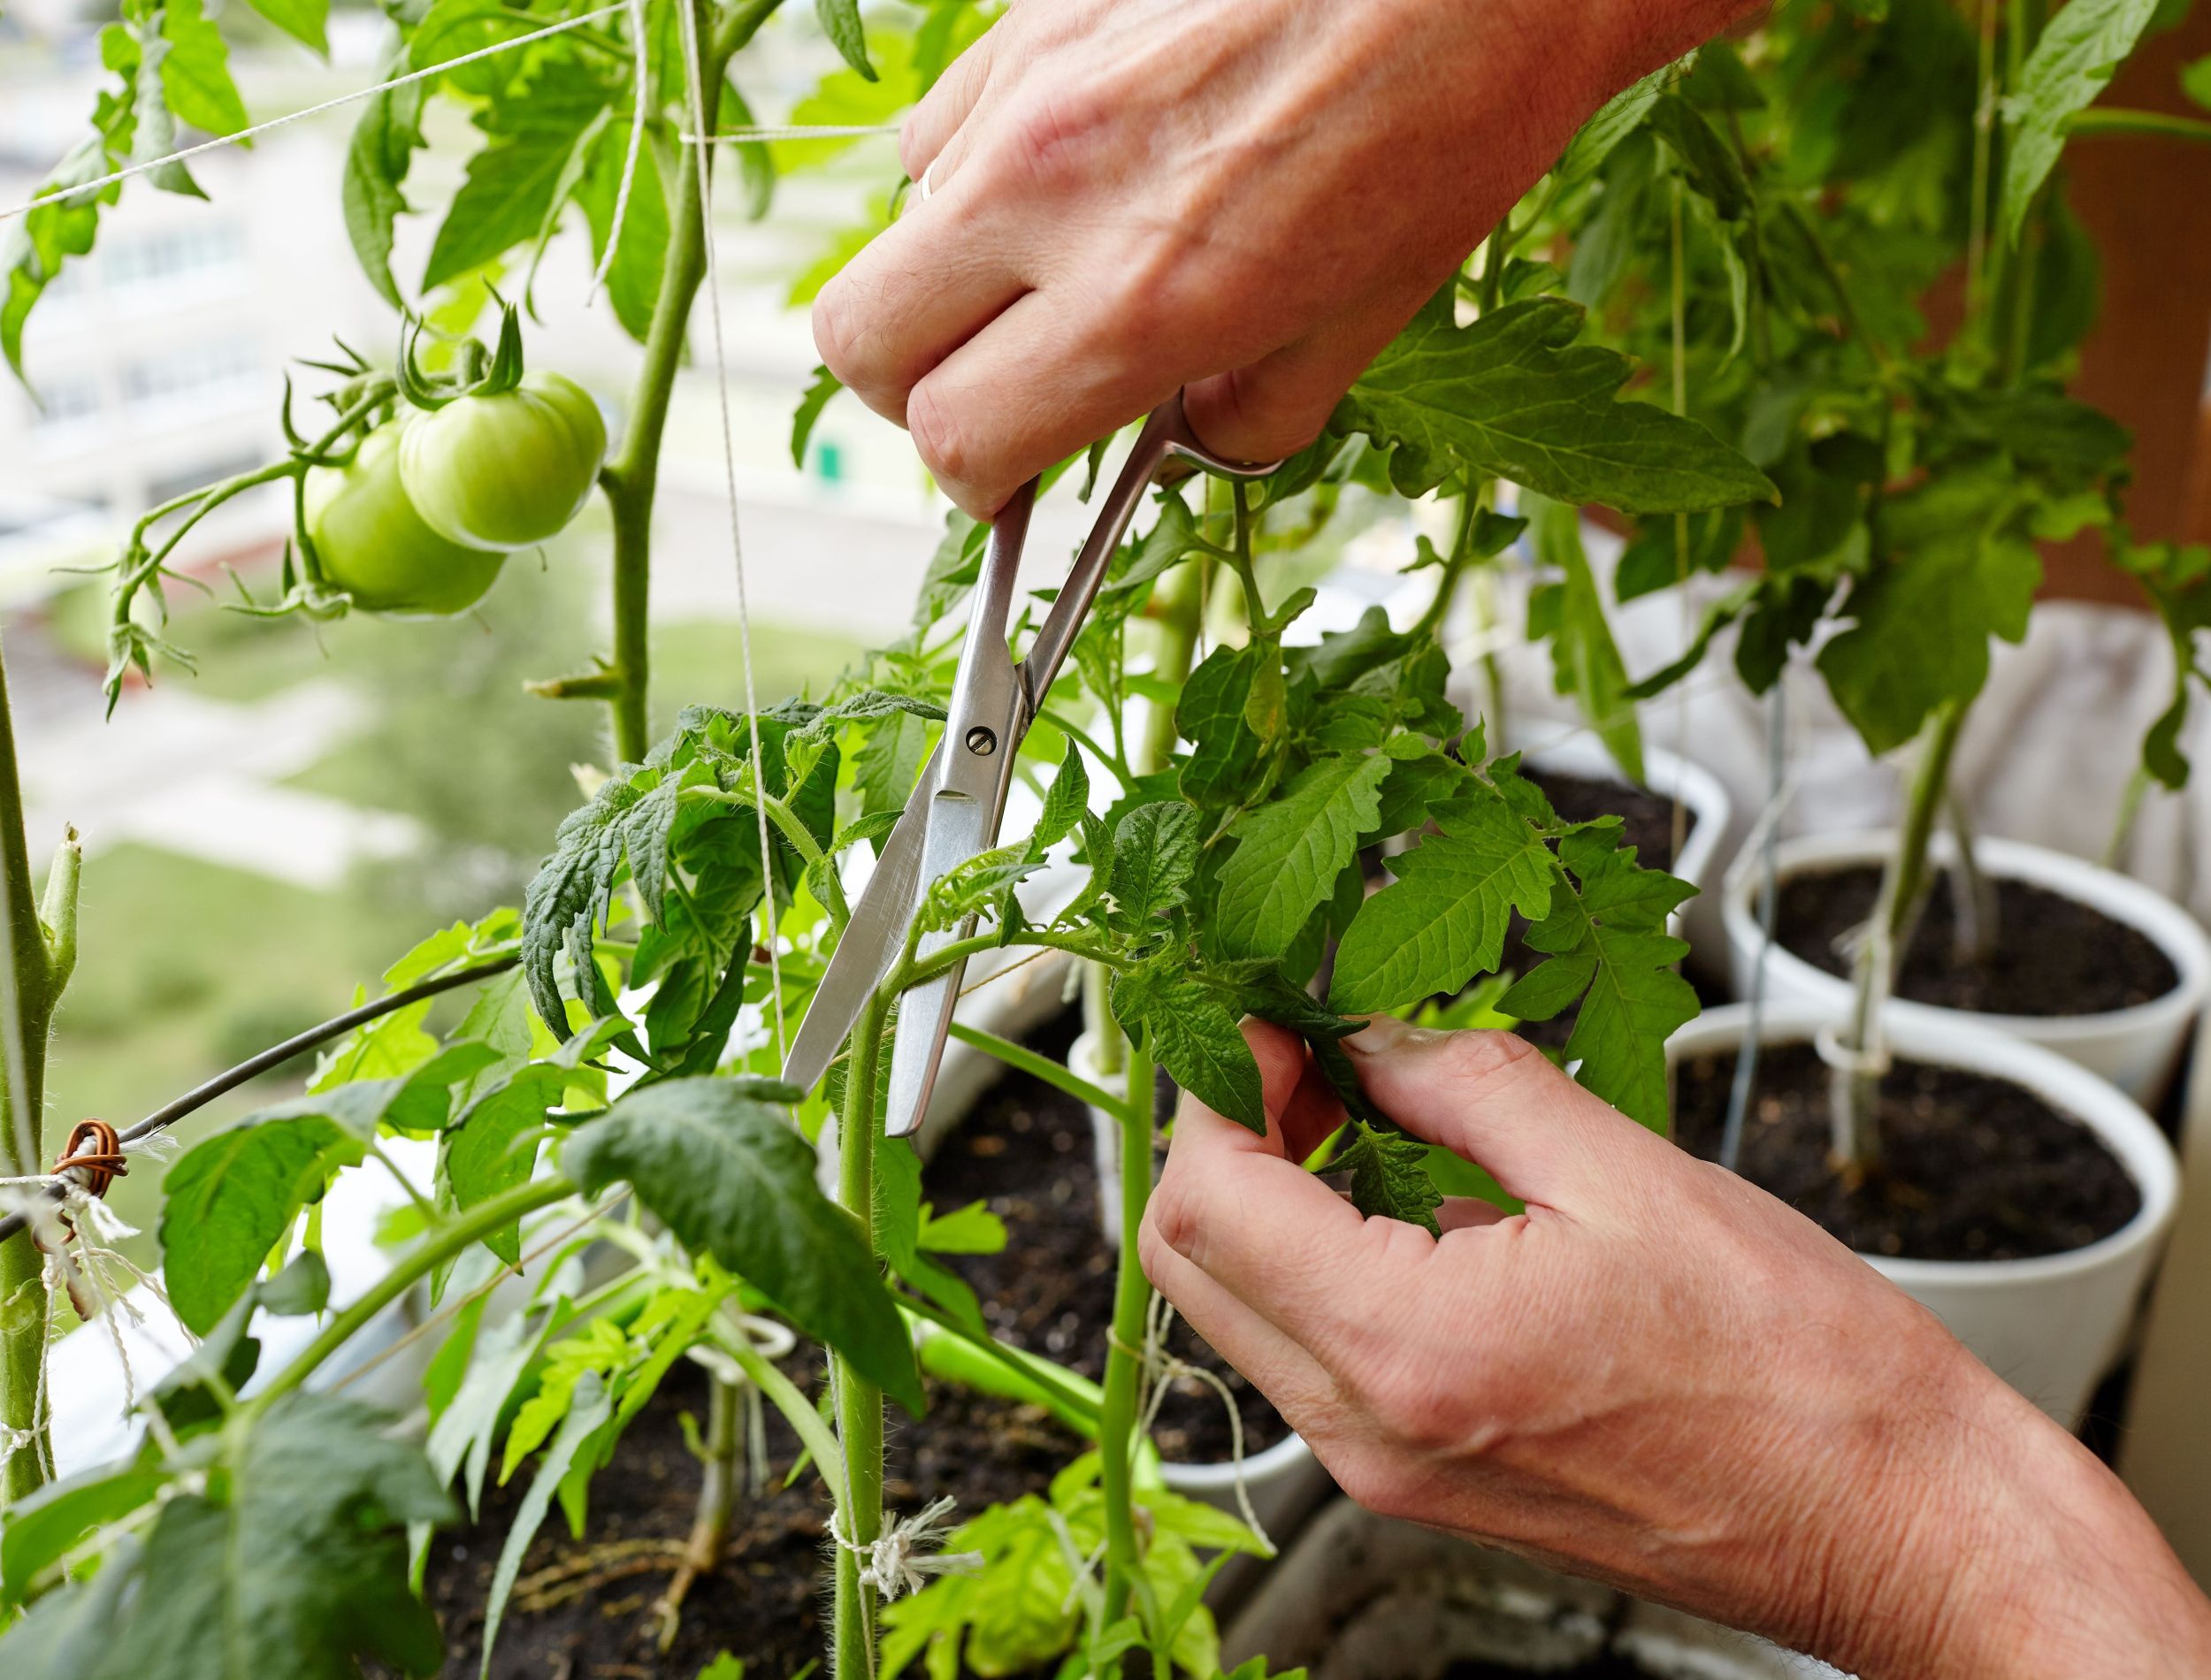 How to Prune Indeterminate Tomato Plants